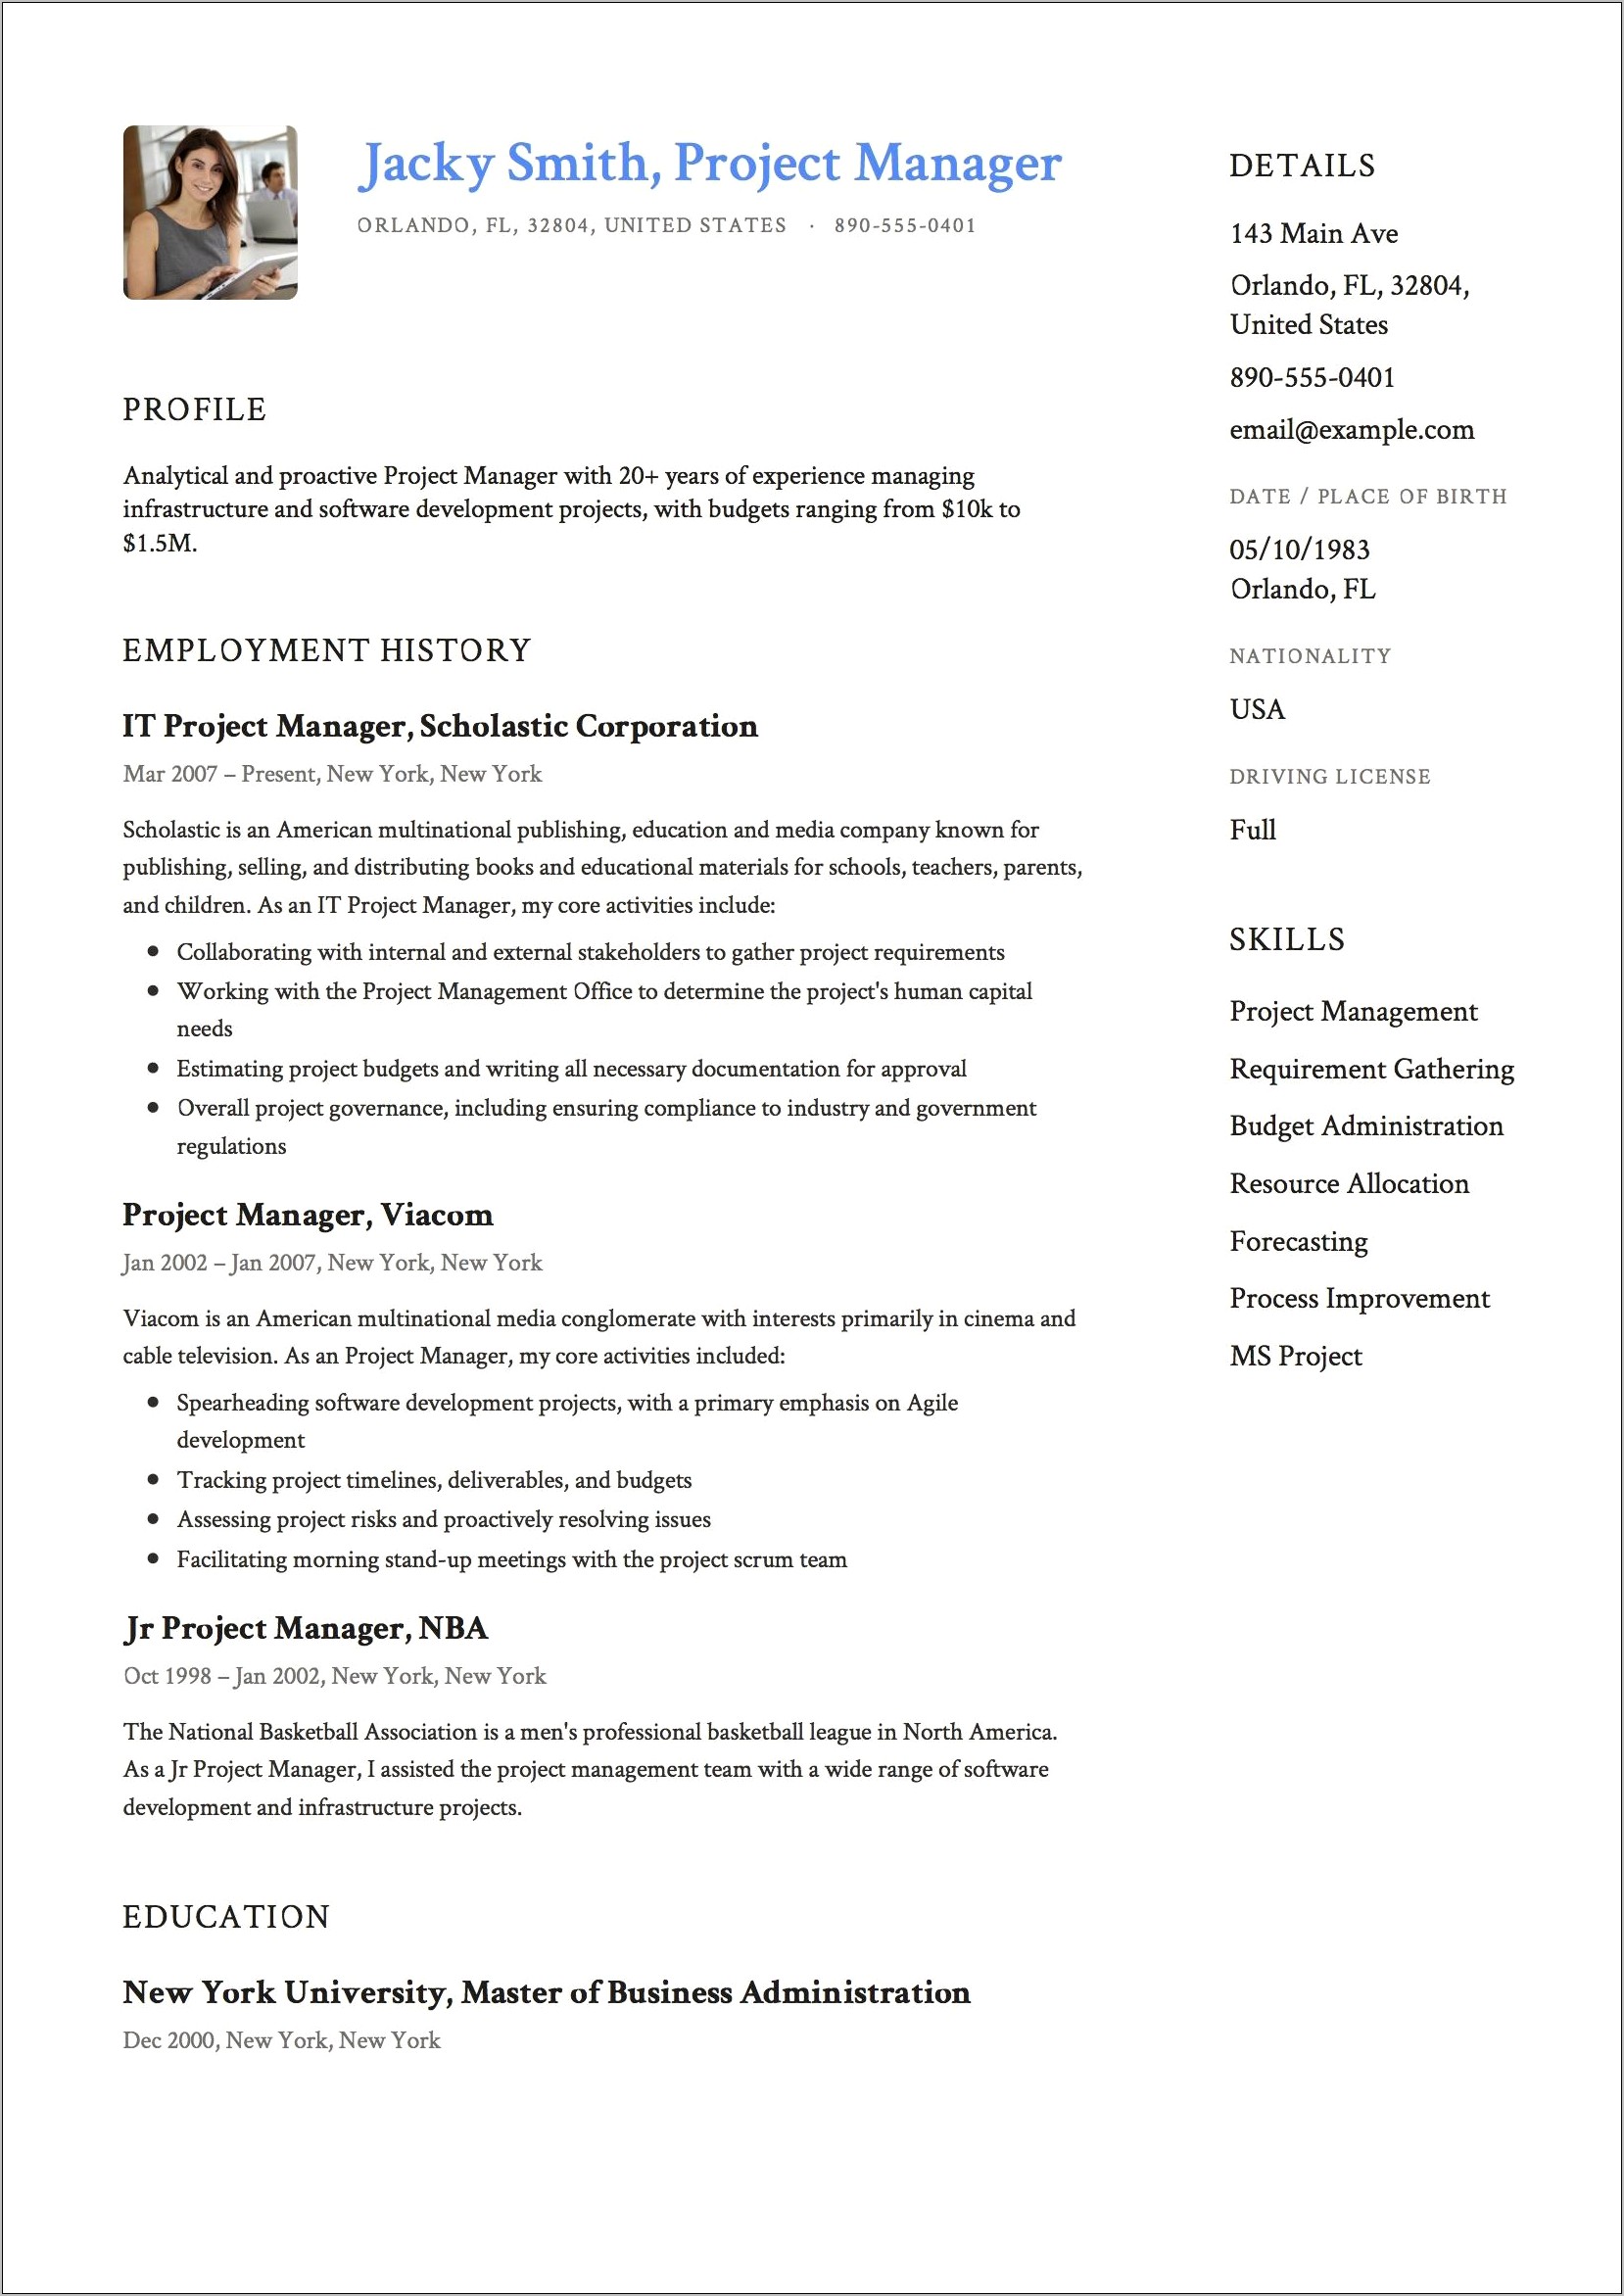 Electrical Engineer Project Manager Resume Sample